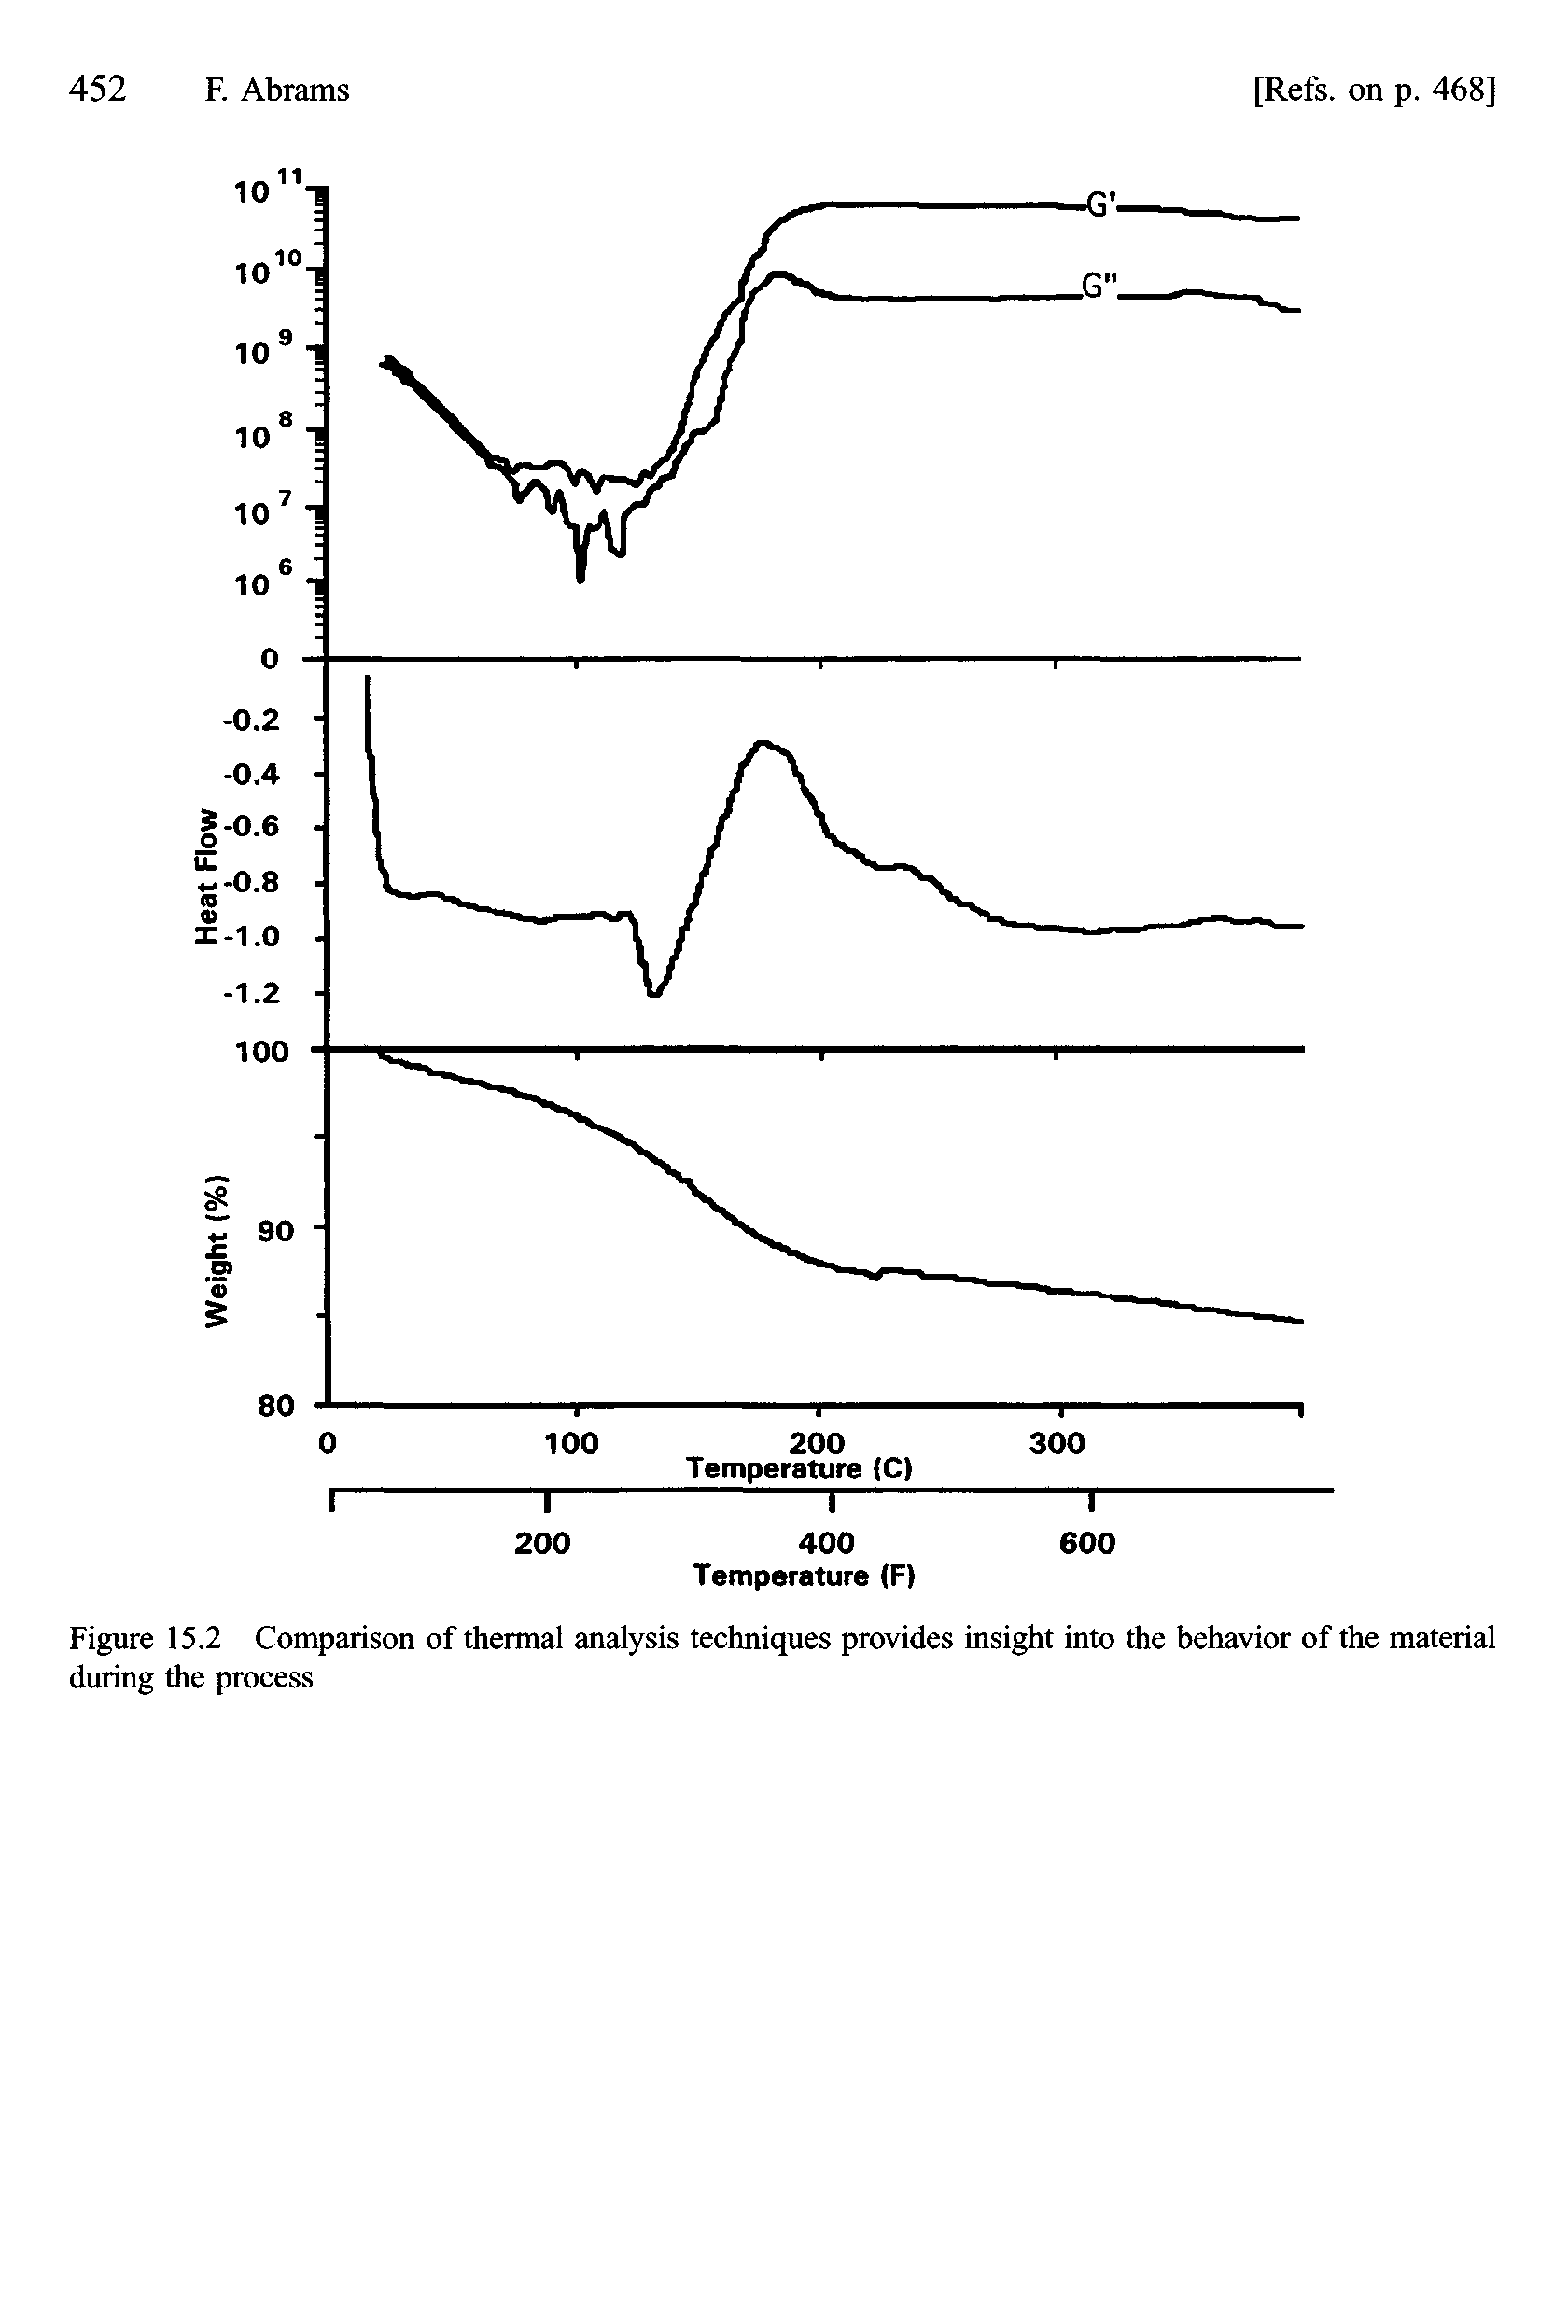 Figure 15.2 Comparison of thermal analysis techniques provides insight into the behavior of the material during the process...